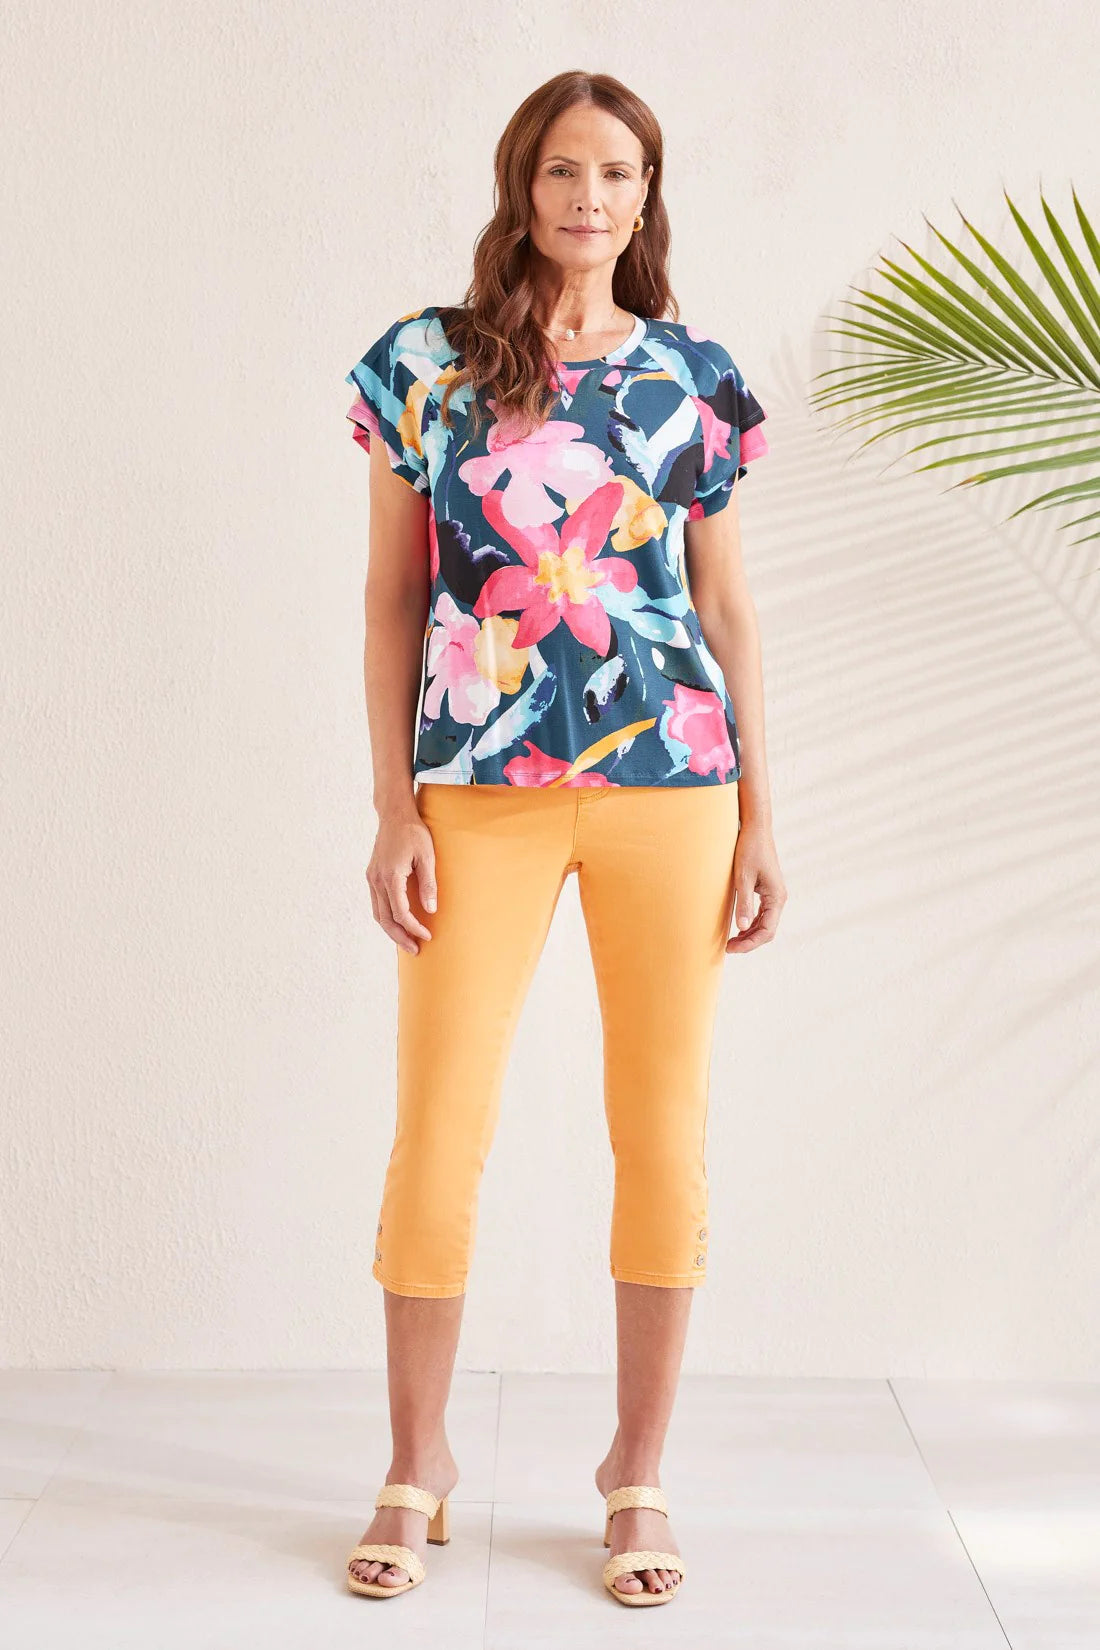 Bold florals define this crew neck top that sports a vibrant print and a 5/8'' neckband. Double ruffle short sleeves unfurl down from either shoulder while raglan armholes and printed rayon jersey fabric add a touch of easygoing flow and comfort.